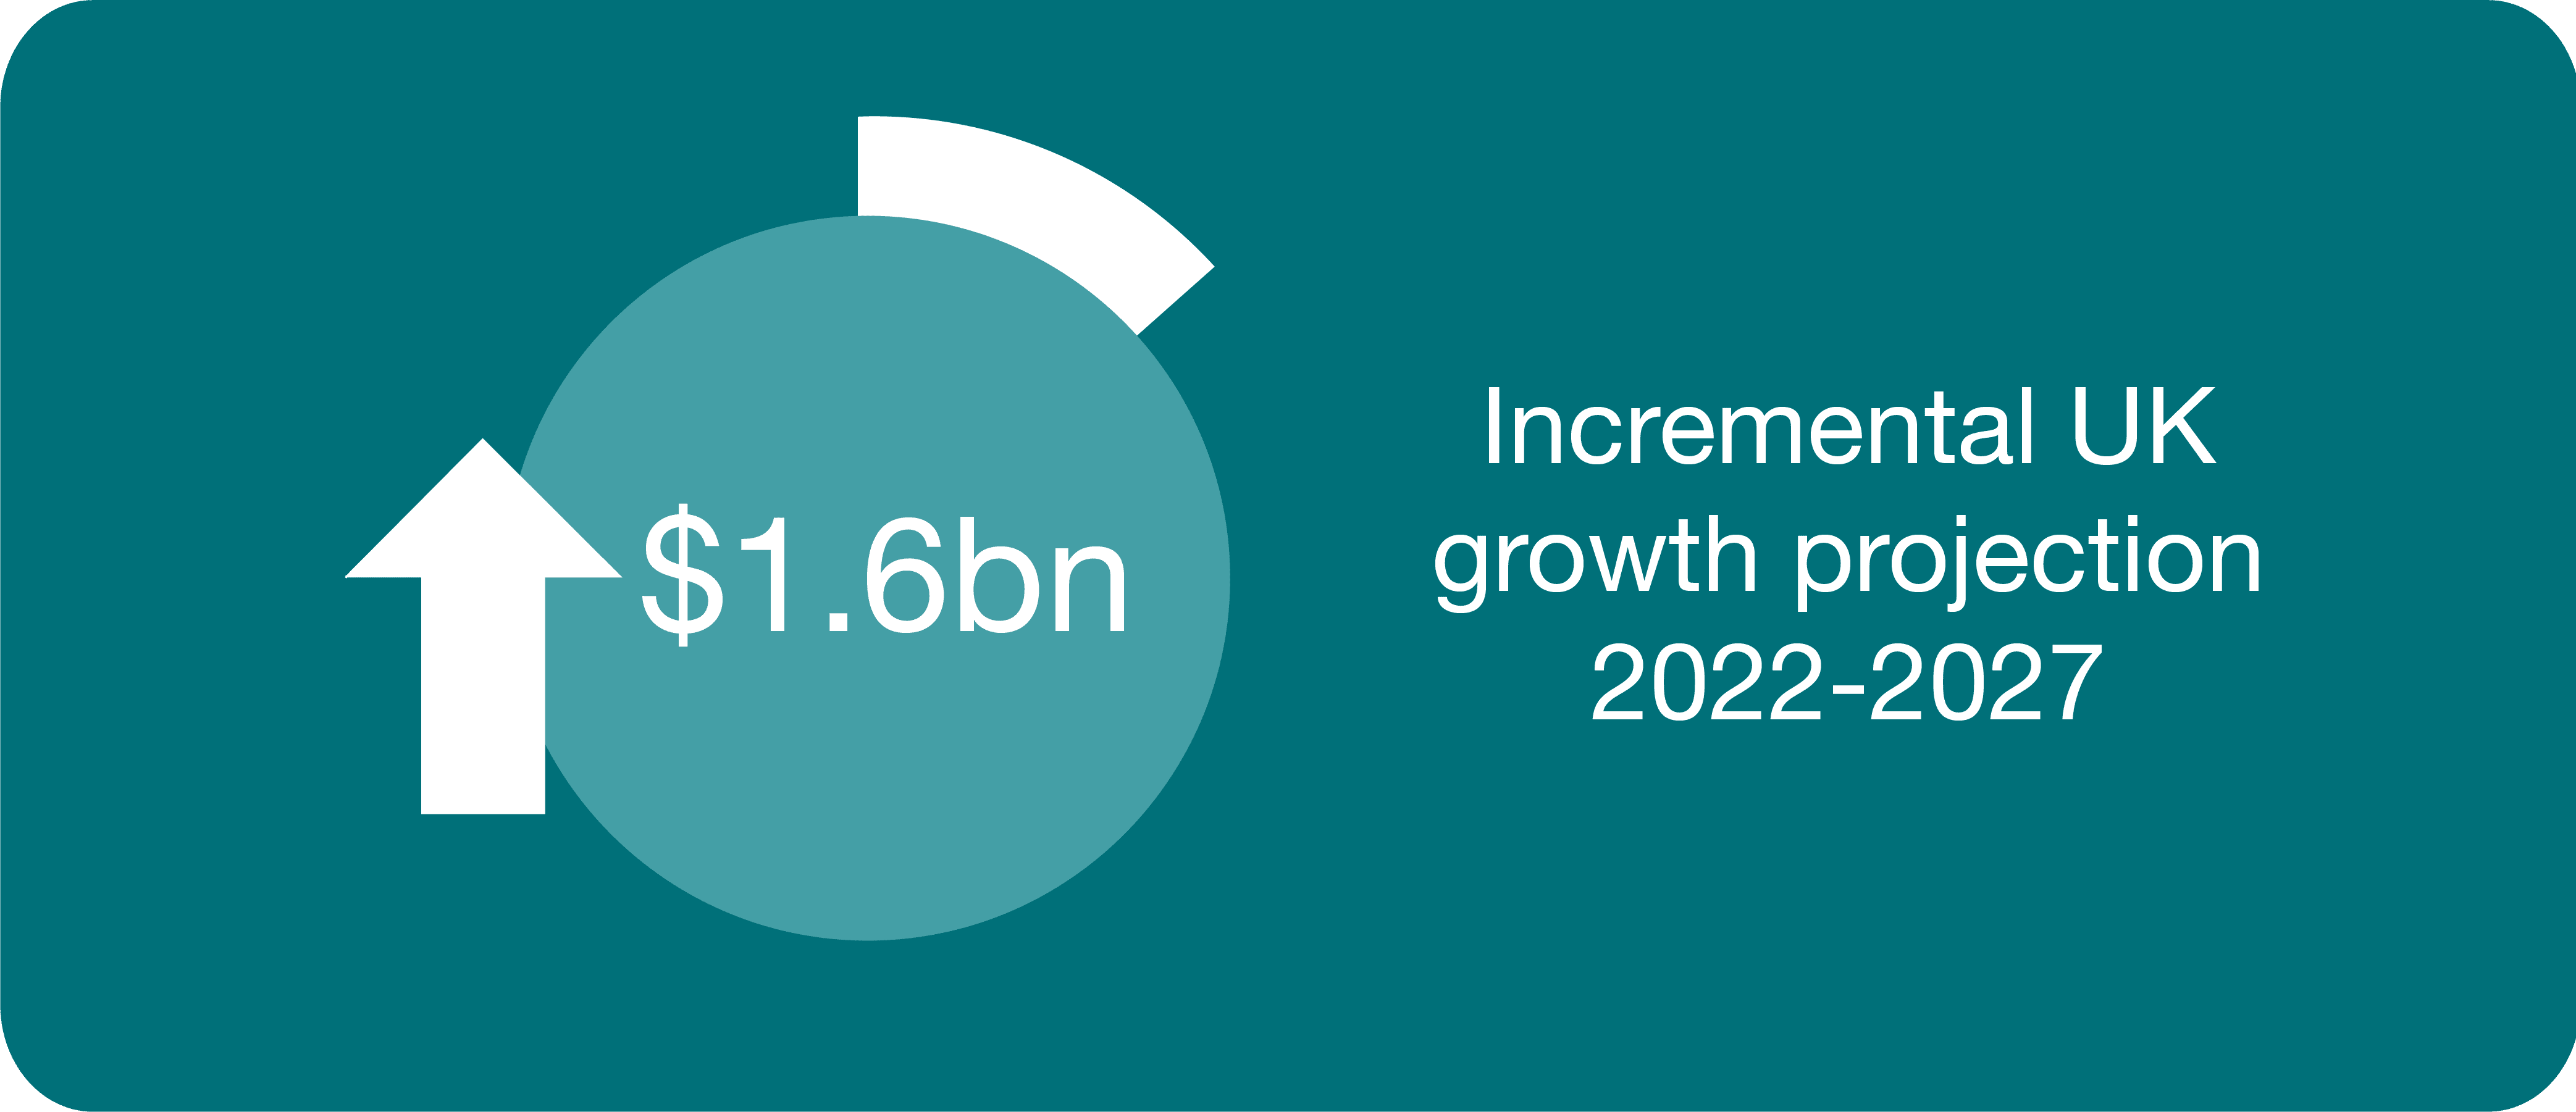 Incremental UK growth projection 2022-2027